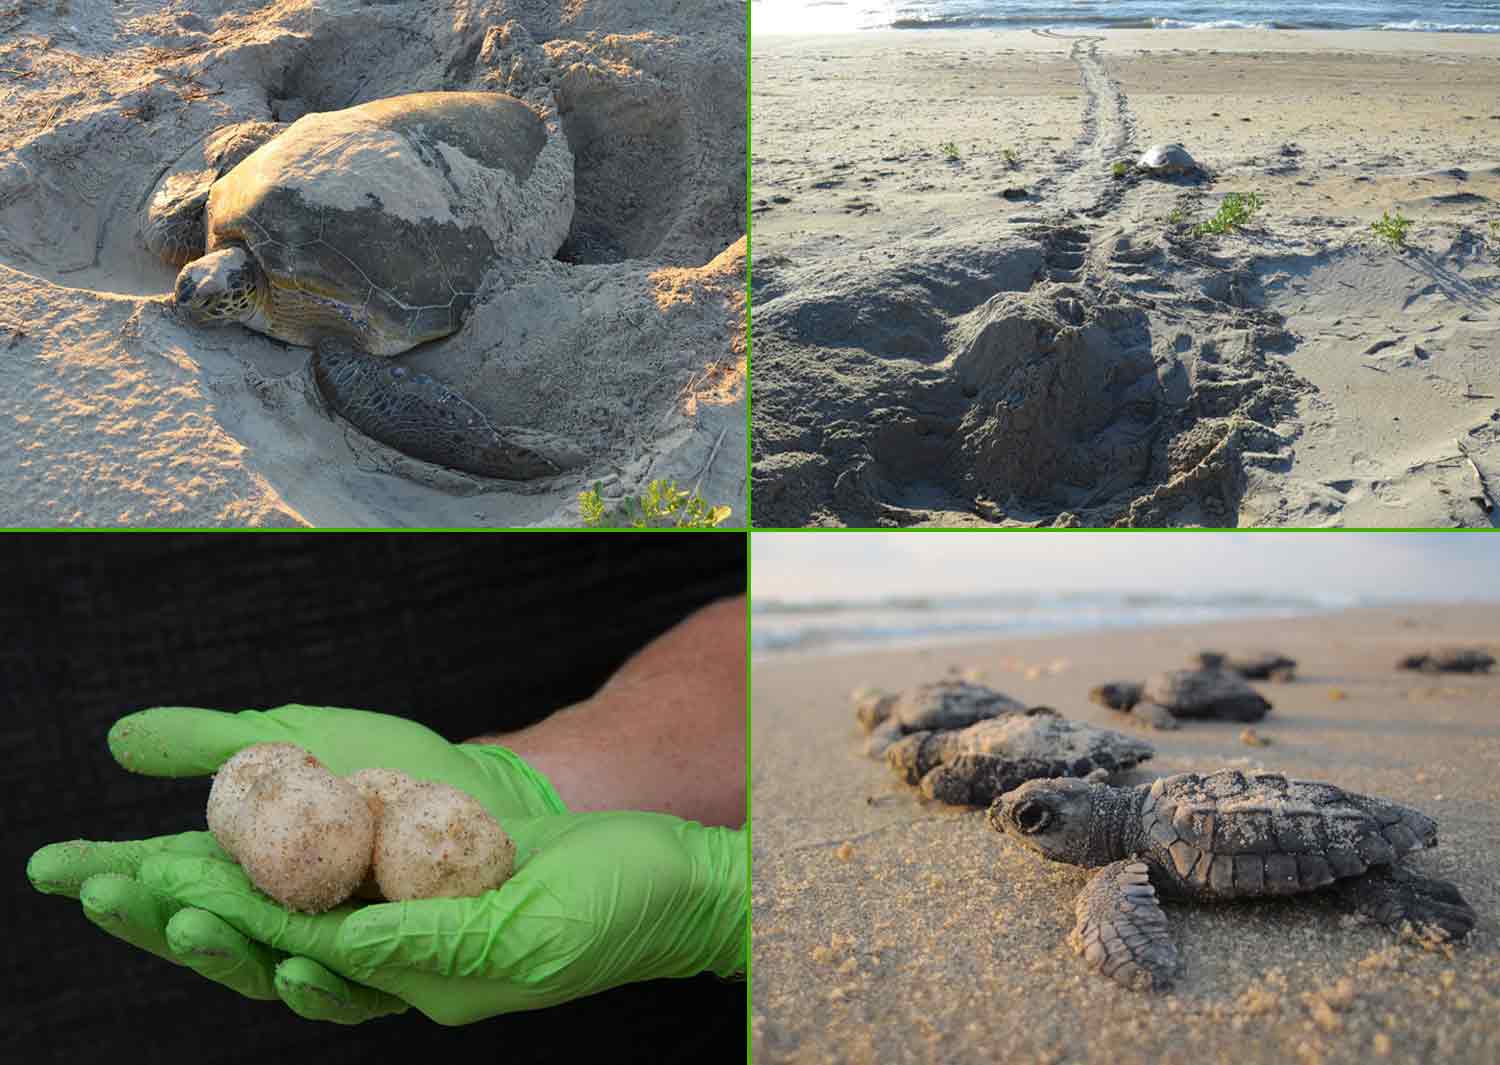 Photos of a turtle in a sand nest, turtle eggs held in gloved hands, a turtle on a beach moving toward the water, and turtle hatchlings on sand facing the water.